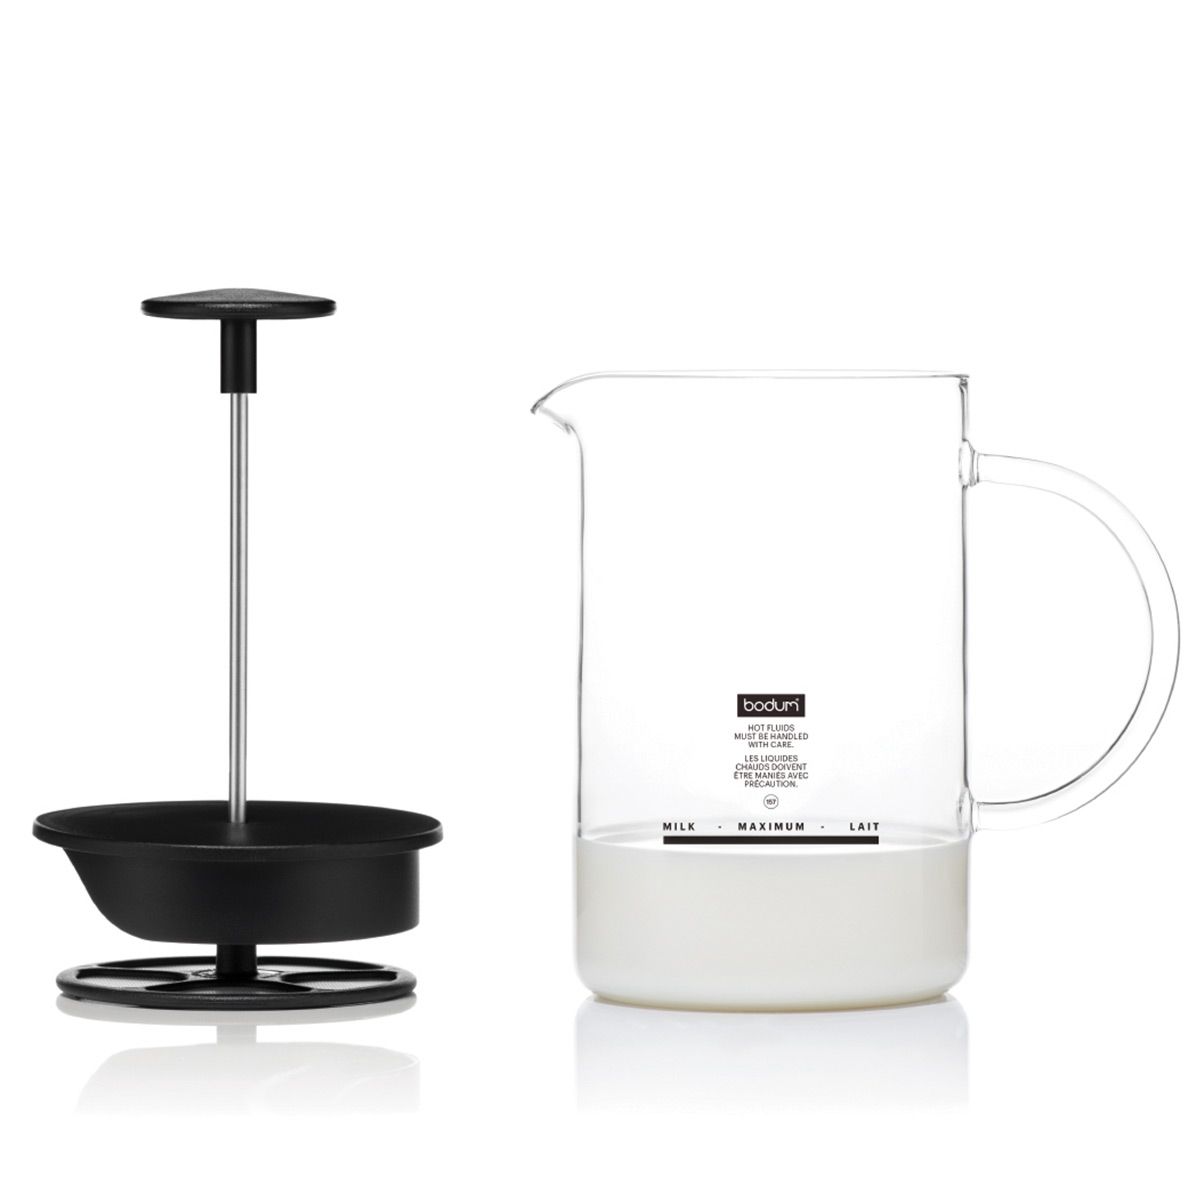 Bodum 1446-01Us4 Latteo Manual Milk Frother Review 